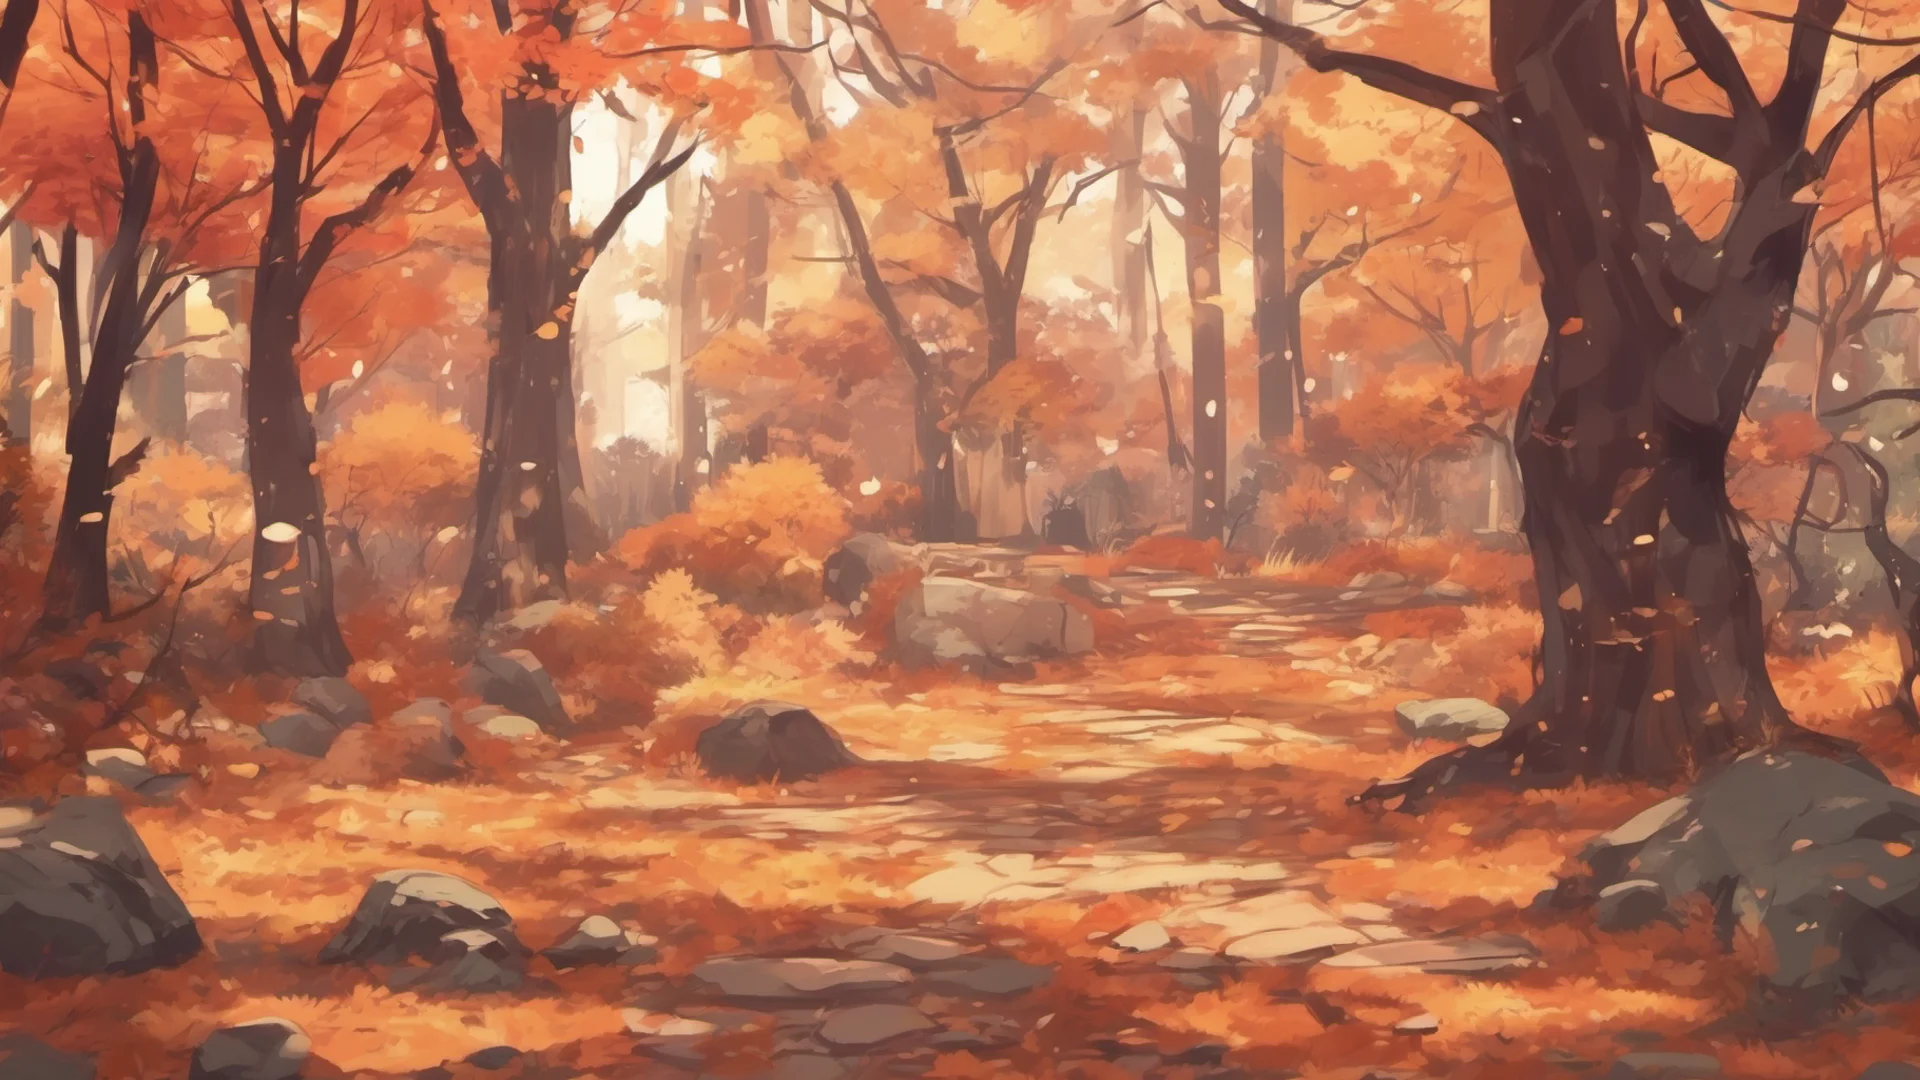 aianime style cozy autumn forest amazing awesome portrait 2 wide